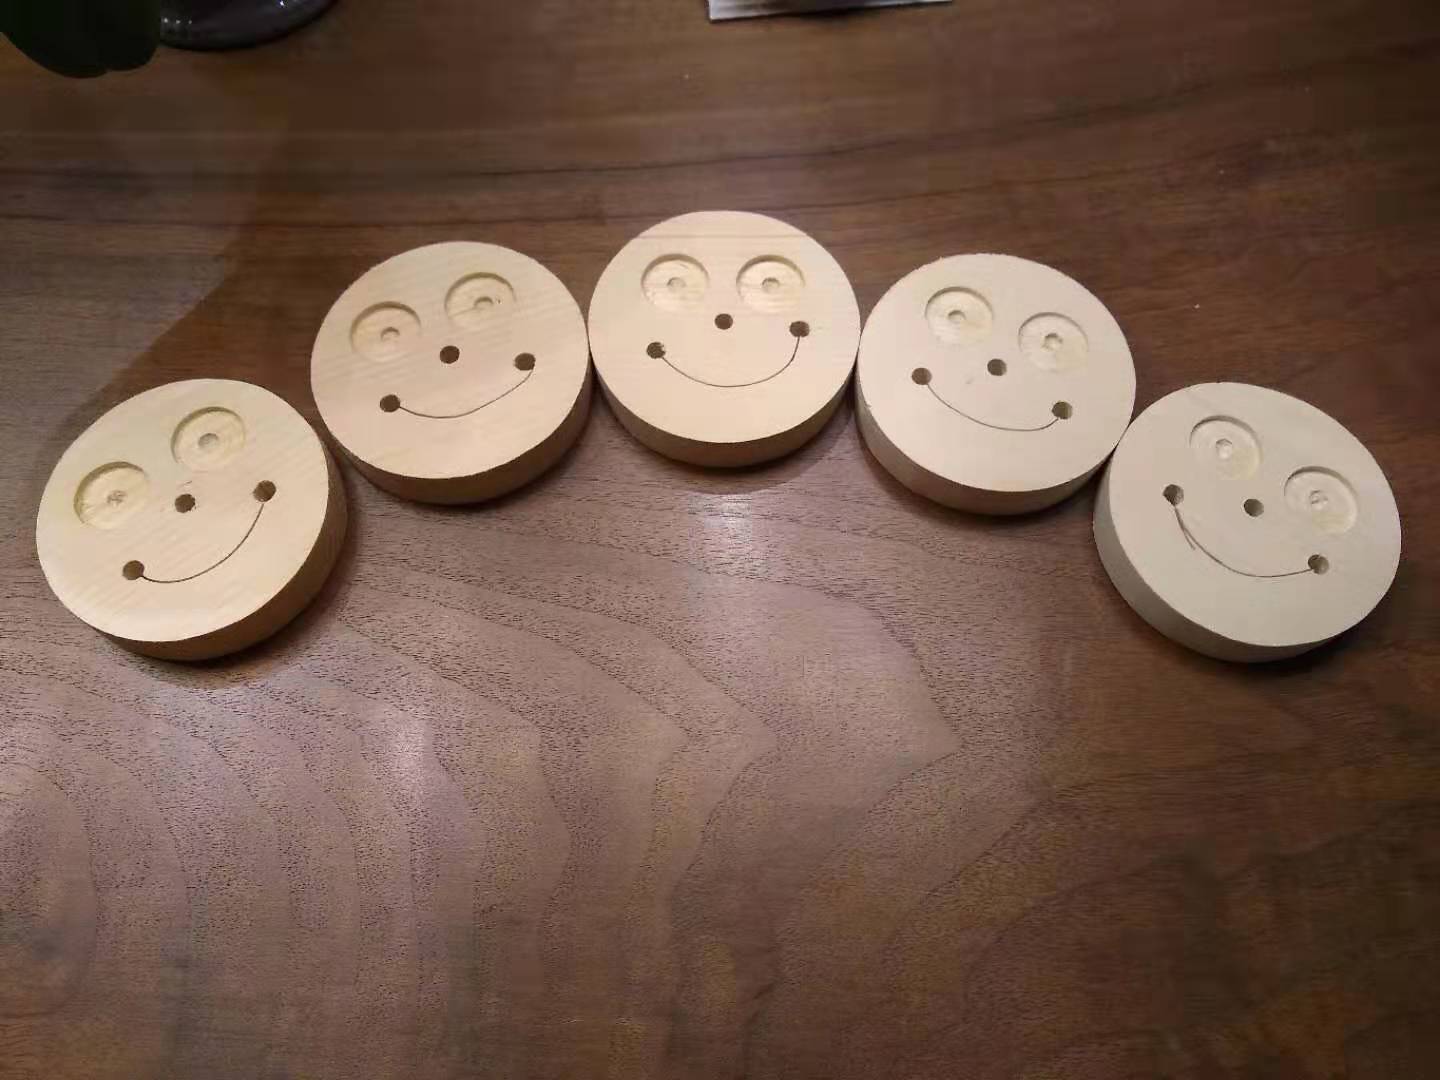 A picture of five small smiling faces made of wood, lined up on a table.